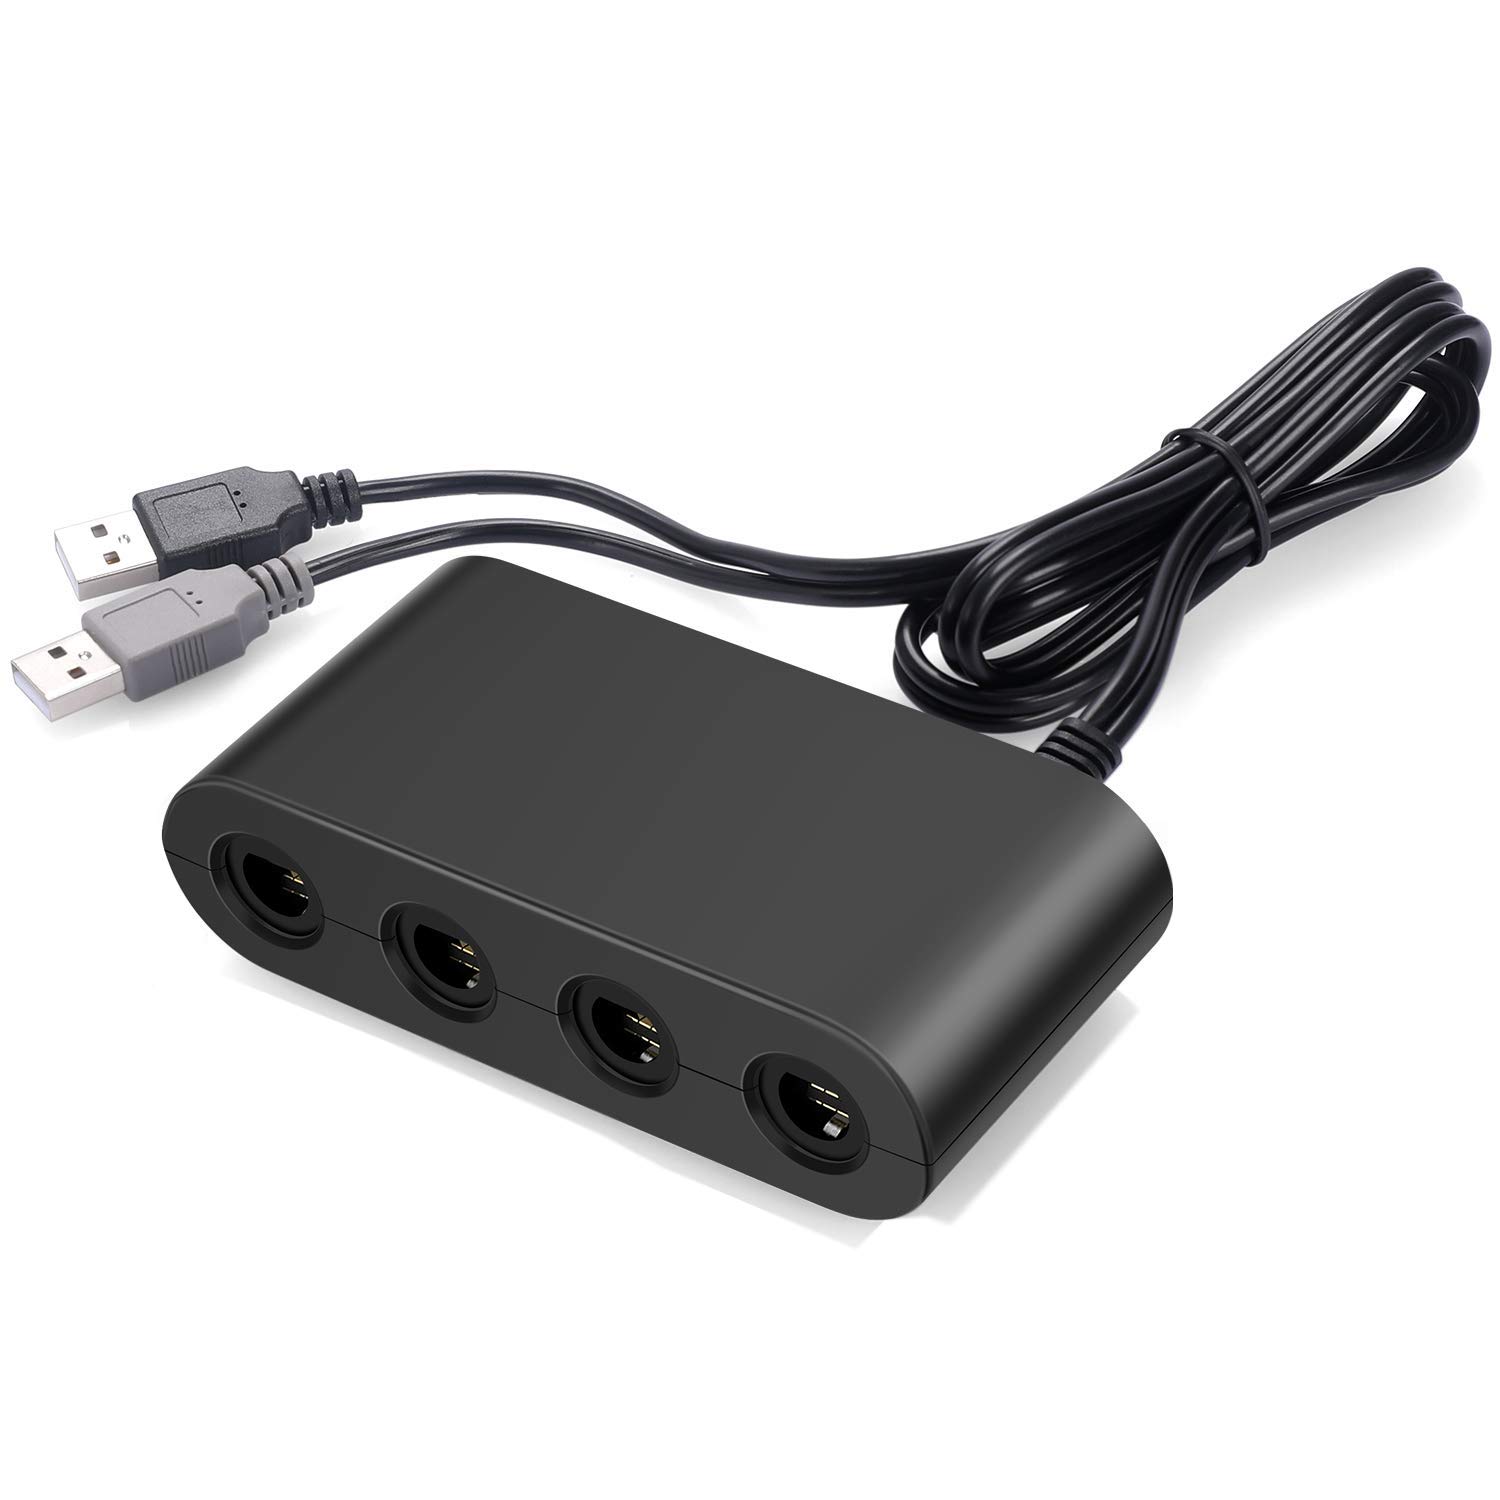 Will mayflash gamecube adapter work for mac with usb extension system